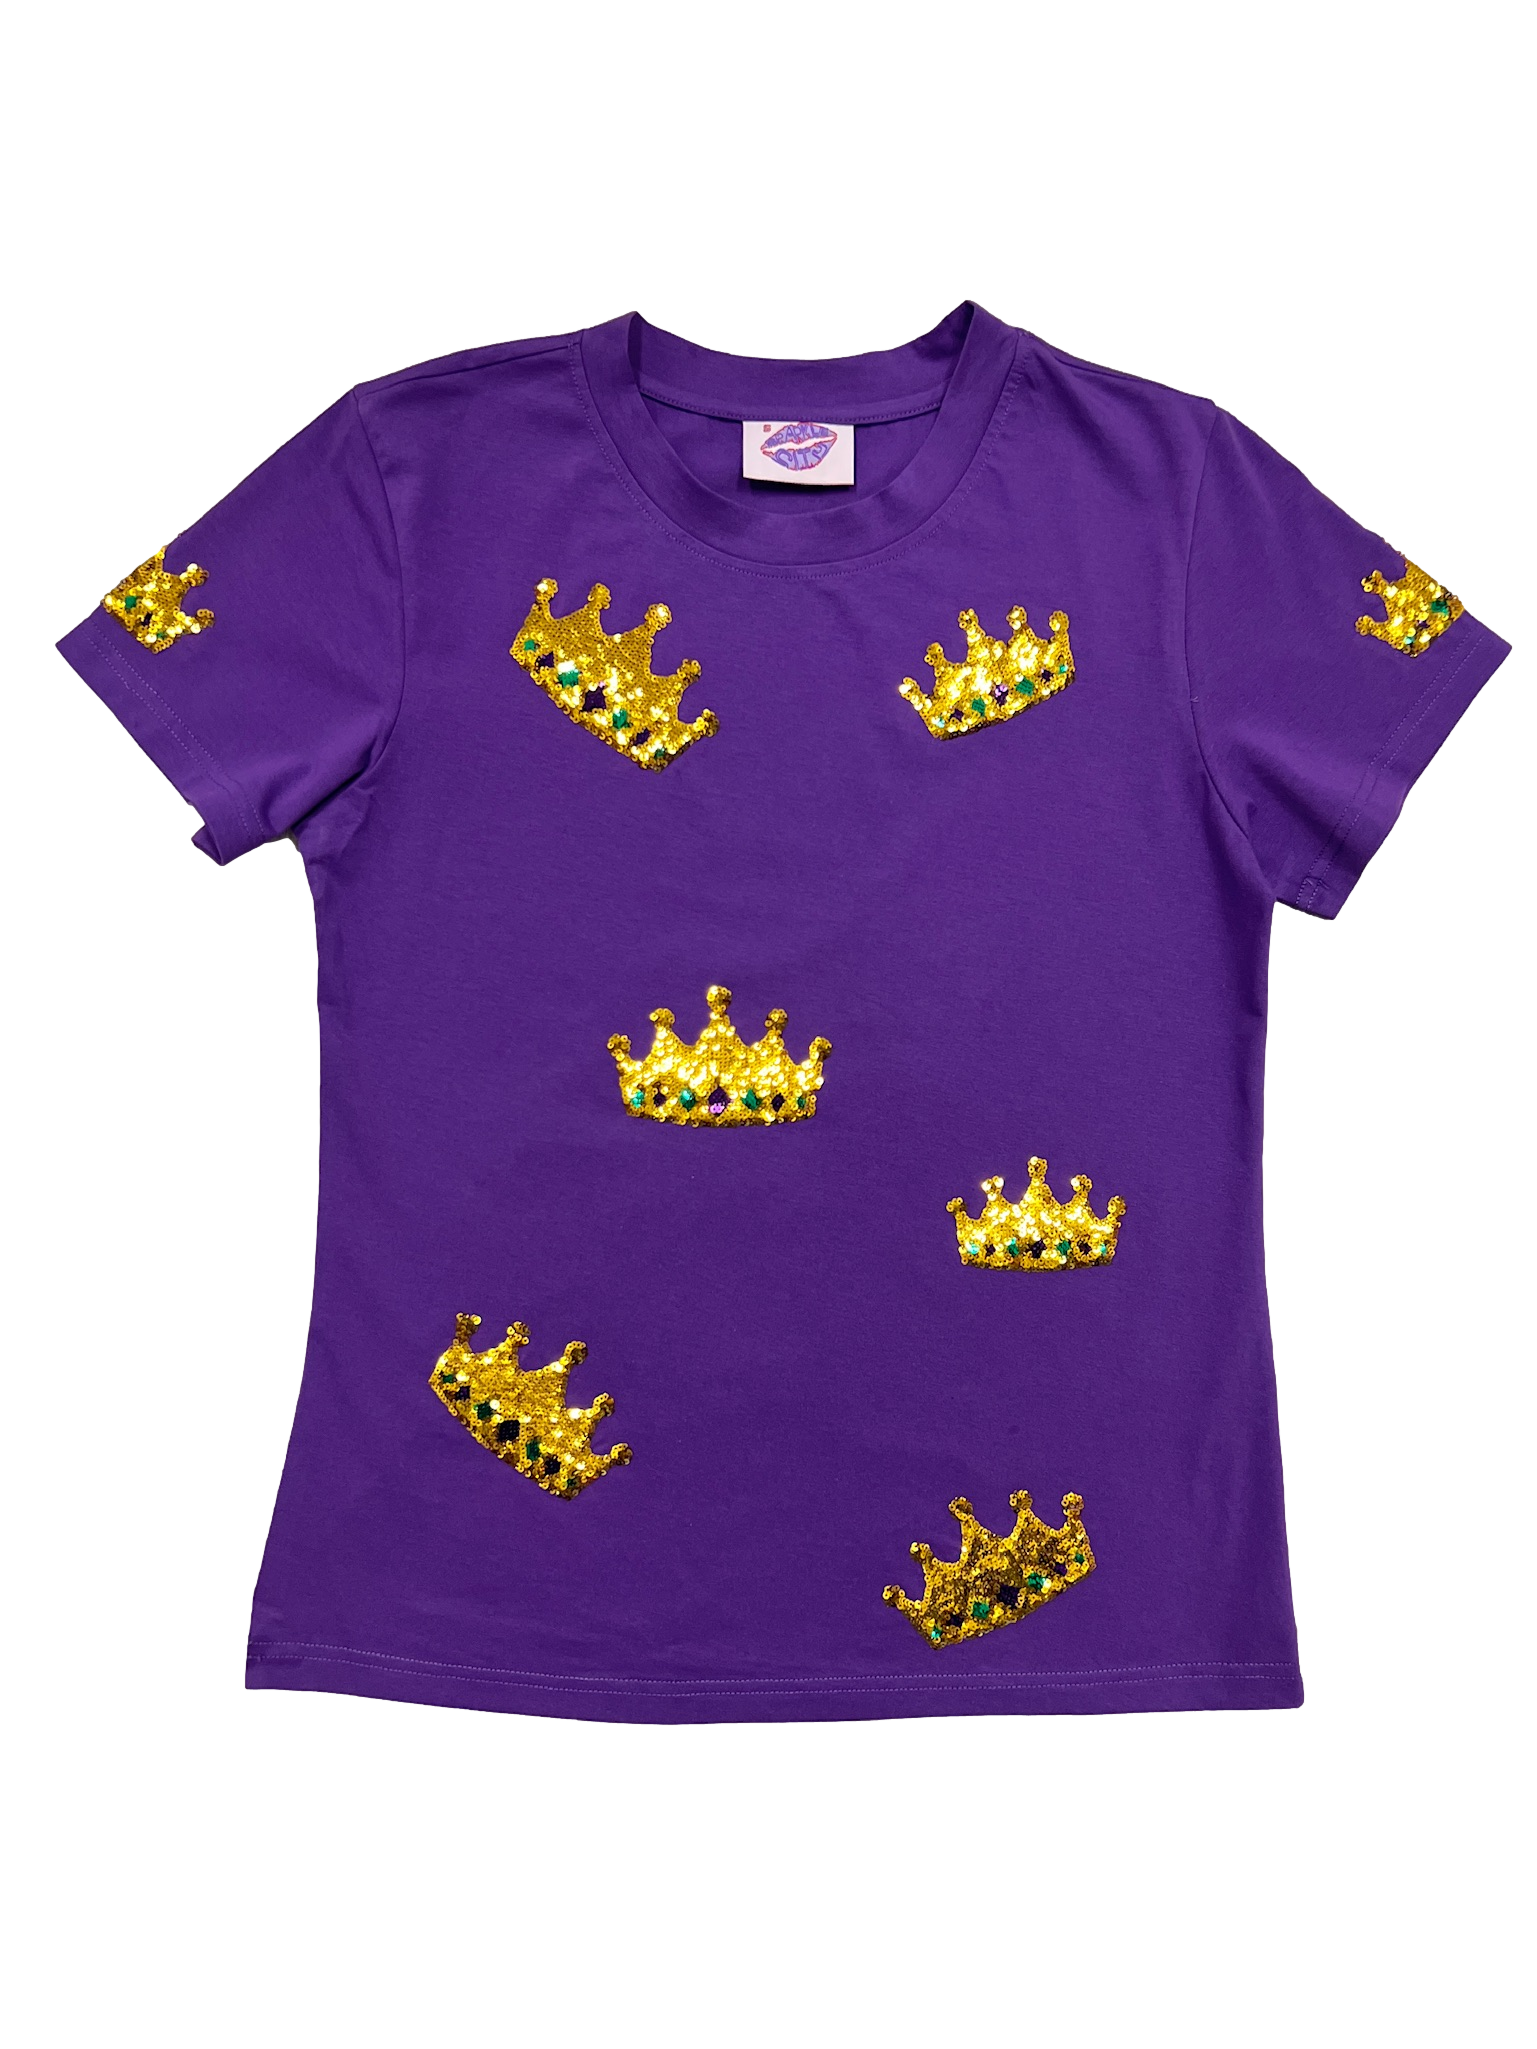 Kids Crown Takeover Tee